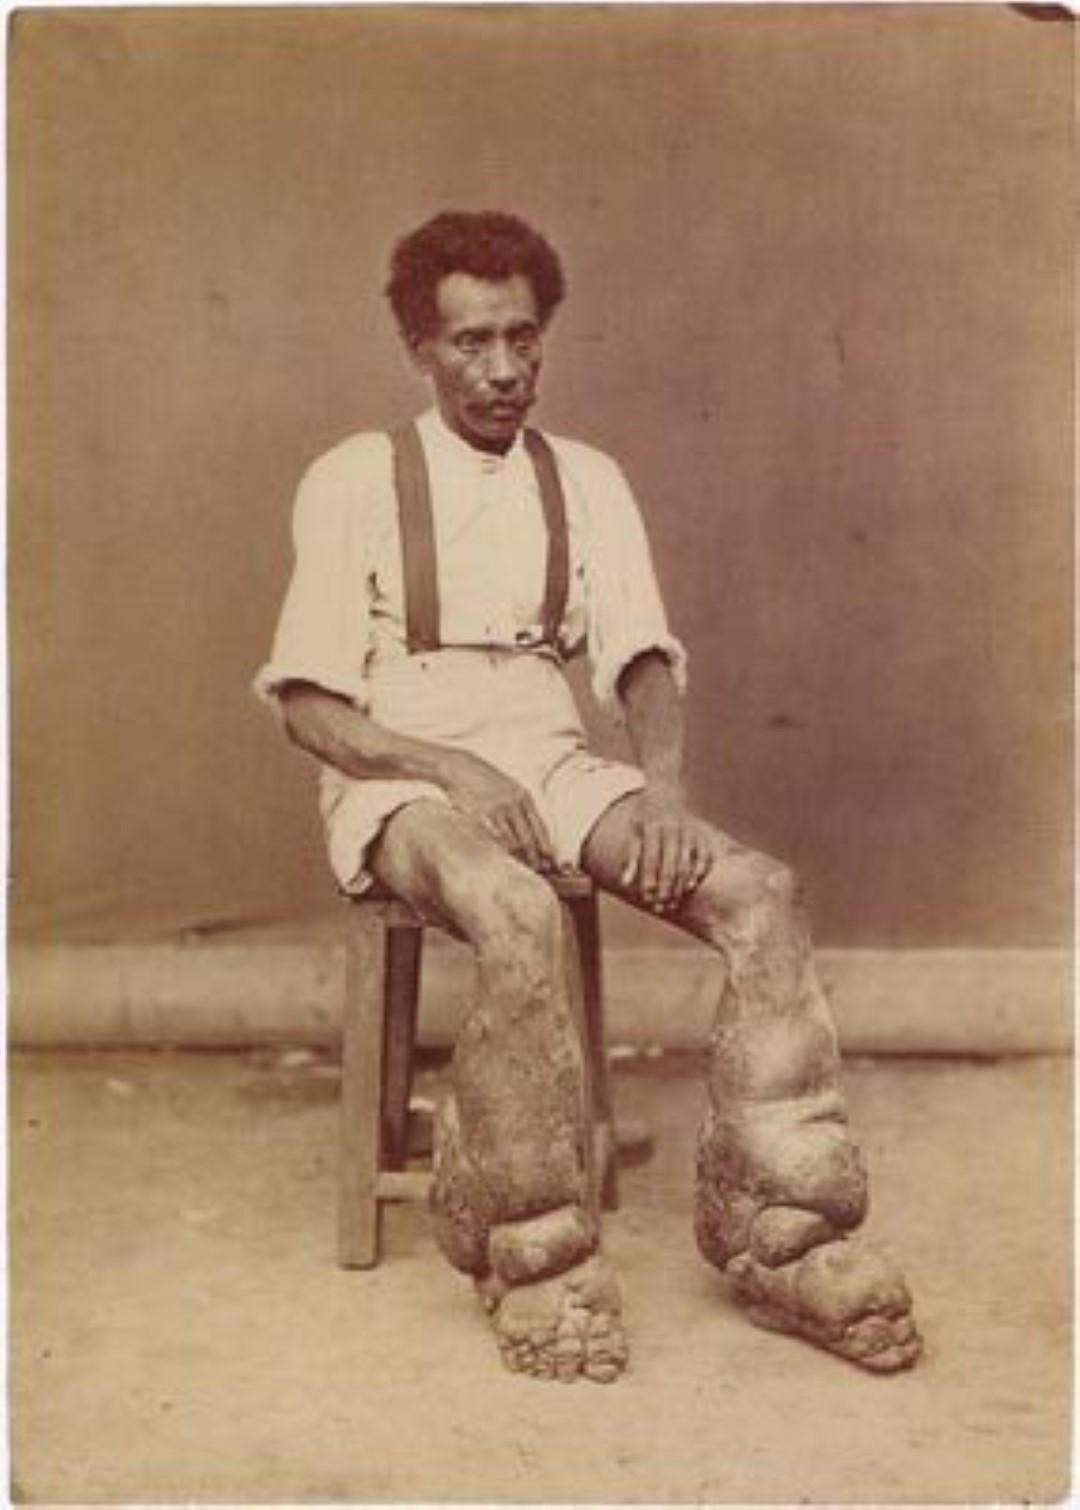 Elephantiasis - He was so distressed by his condition that he begged for amputation. Instead an experimental surgery was performed on him which successfully removed much of the excess tissue. Unfortunately, however, he died five months later.